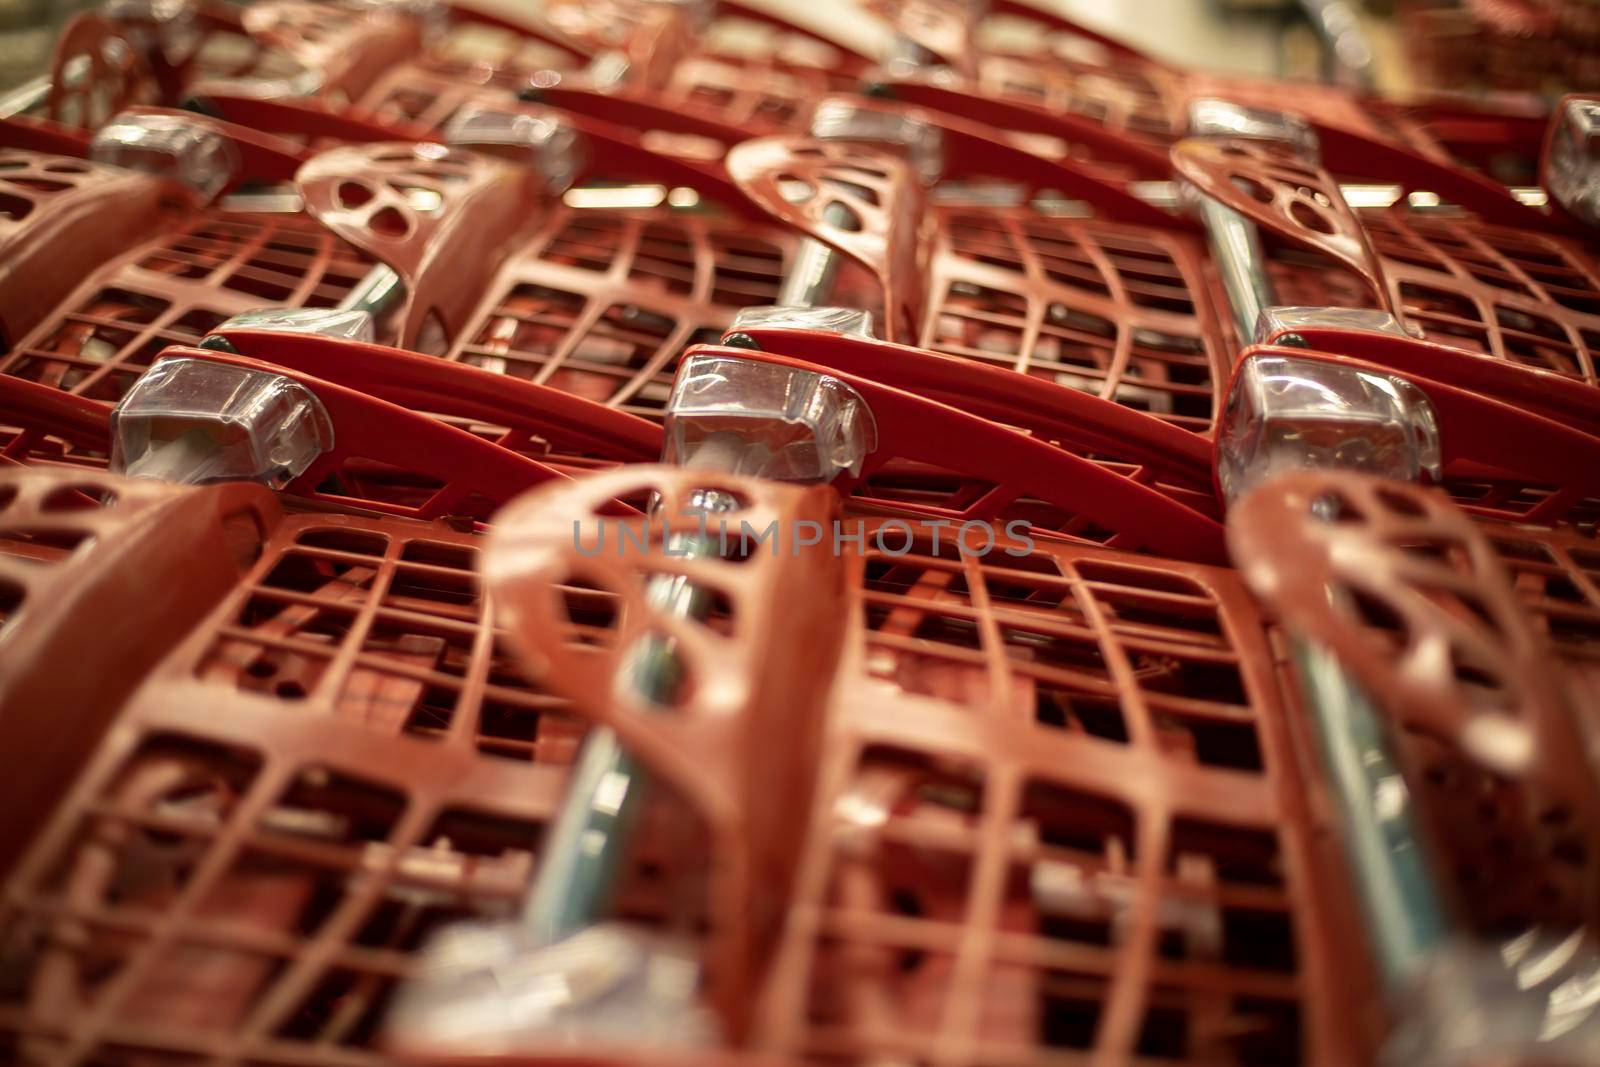 Baskets for products. Supermarket details. Red plastic containers.